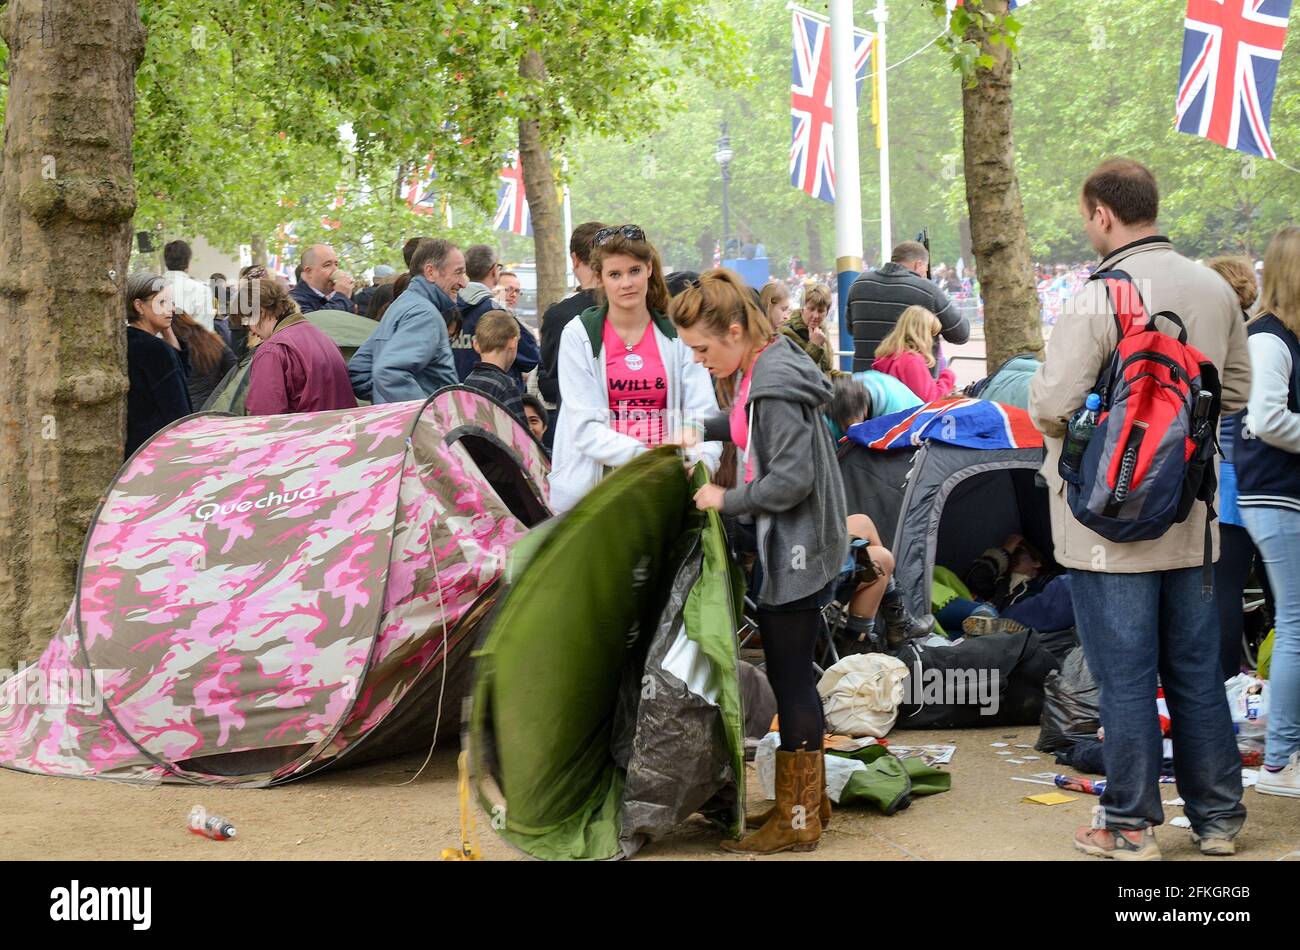 2011 Royal wedding. People have camped in tents in The Mall to be first on the fence hoping to catch a glimpse of William and Kate. Packing away Stock Photo